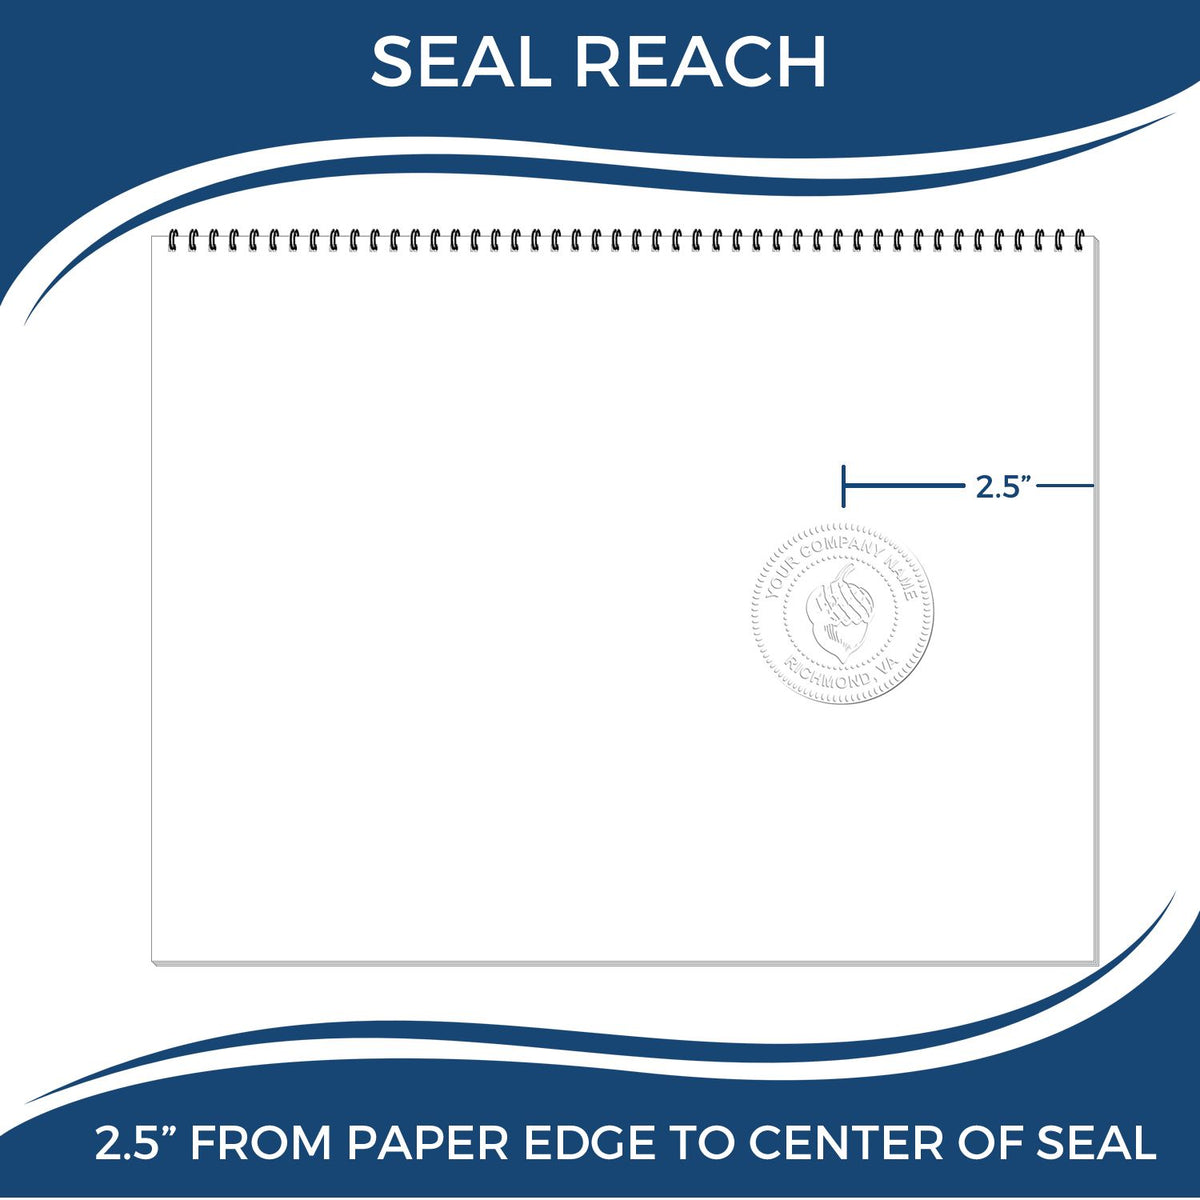 An infographic showing the seal reach which is represented by a ruler and a miniature seal image of the Long Reach Louisiana Geology Seal